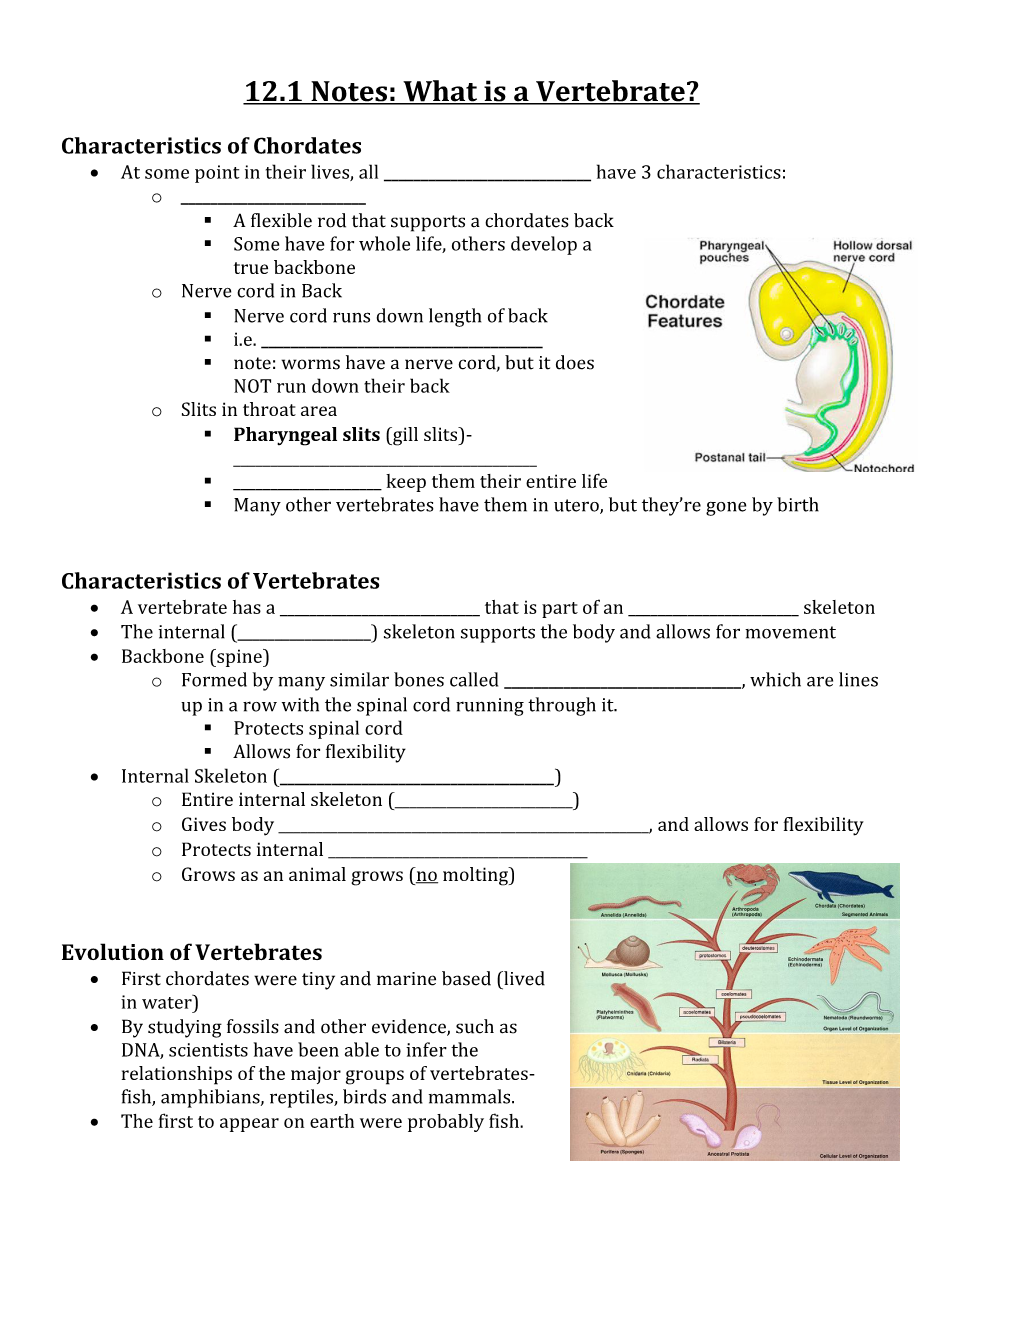 12.1 Notes: What Is a Vertebrate?